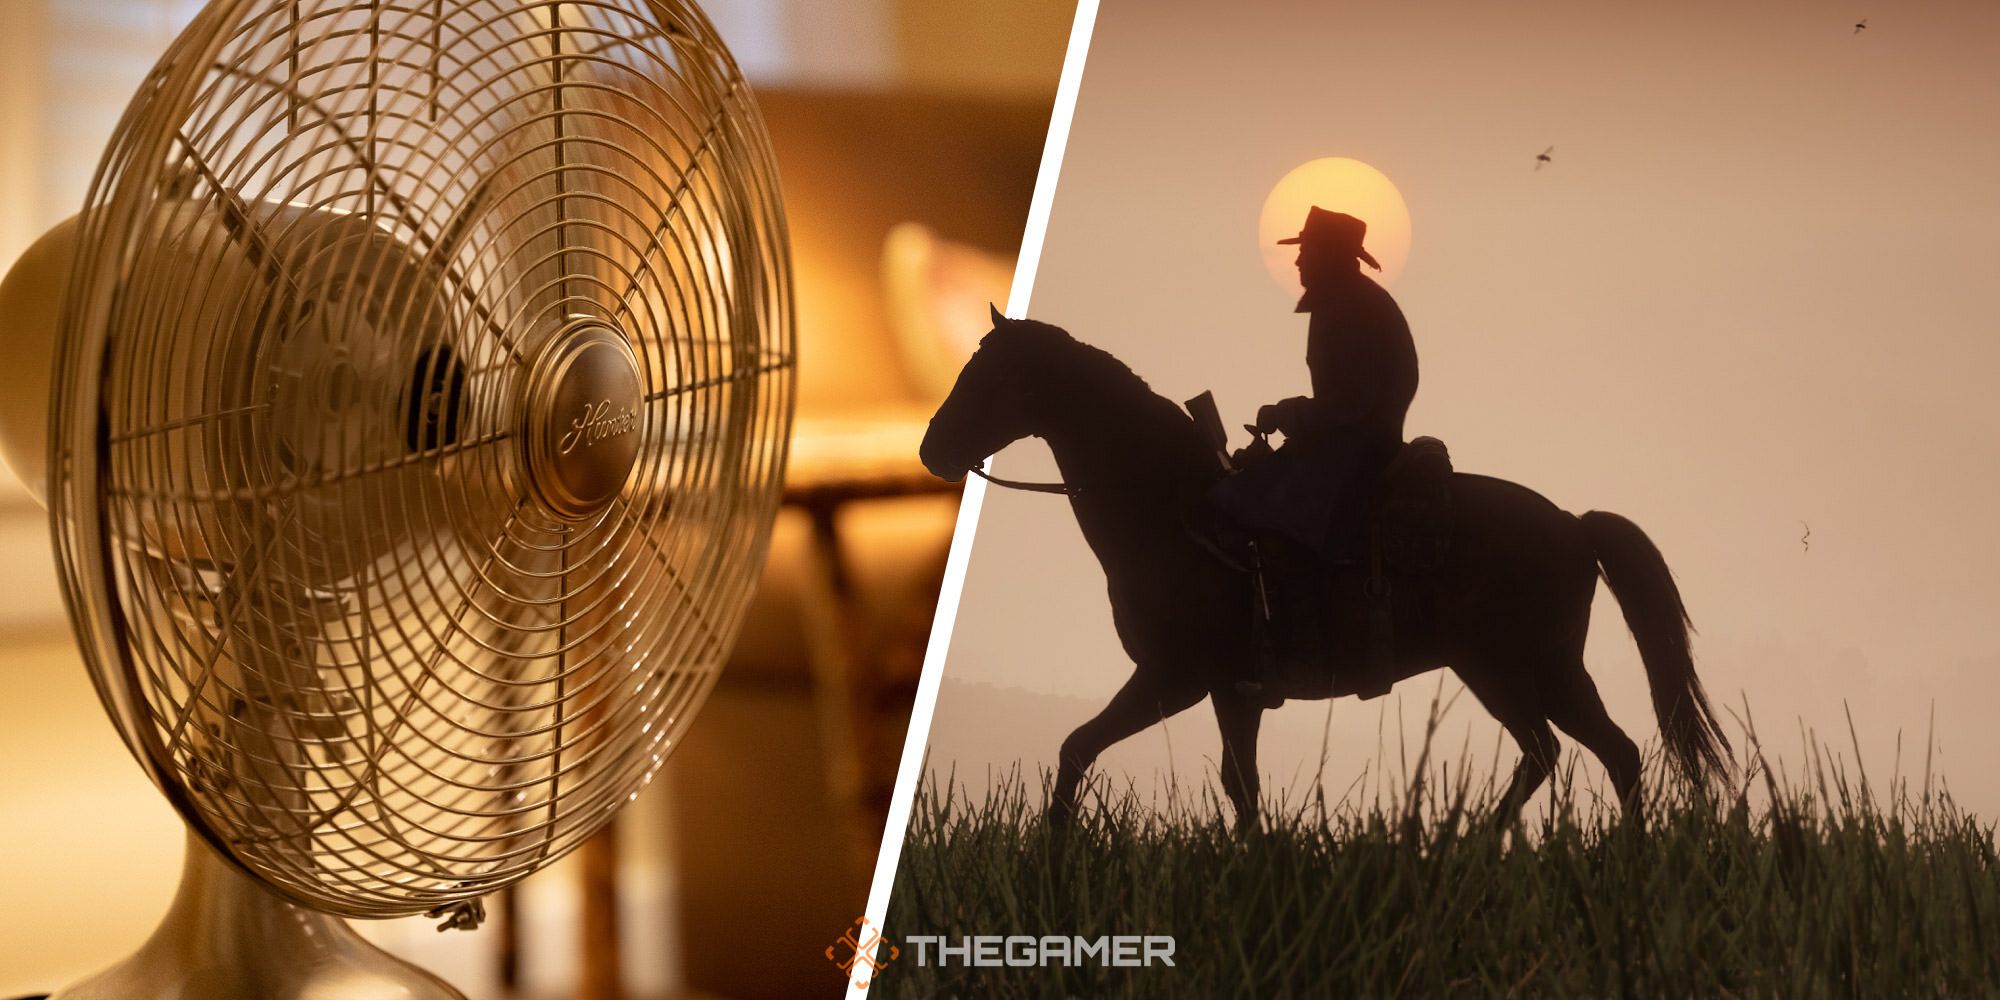 a desk fan and a silhoutte of a man riding a horse